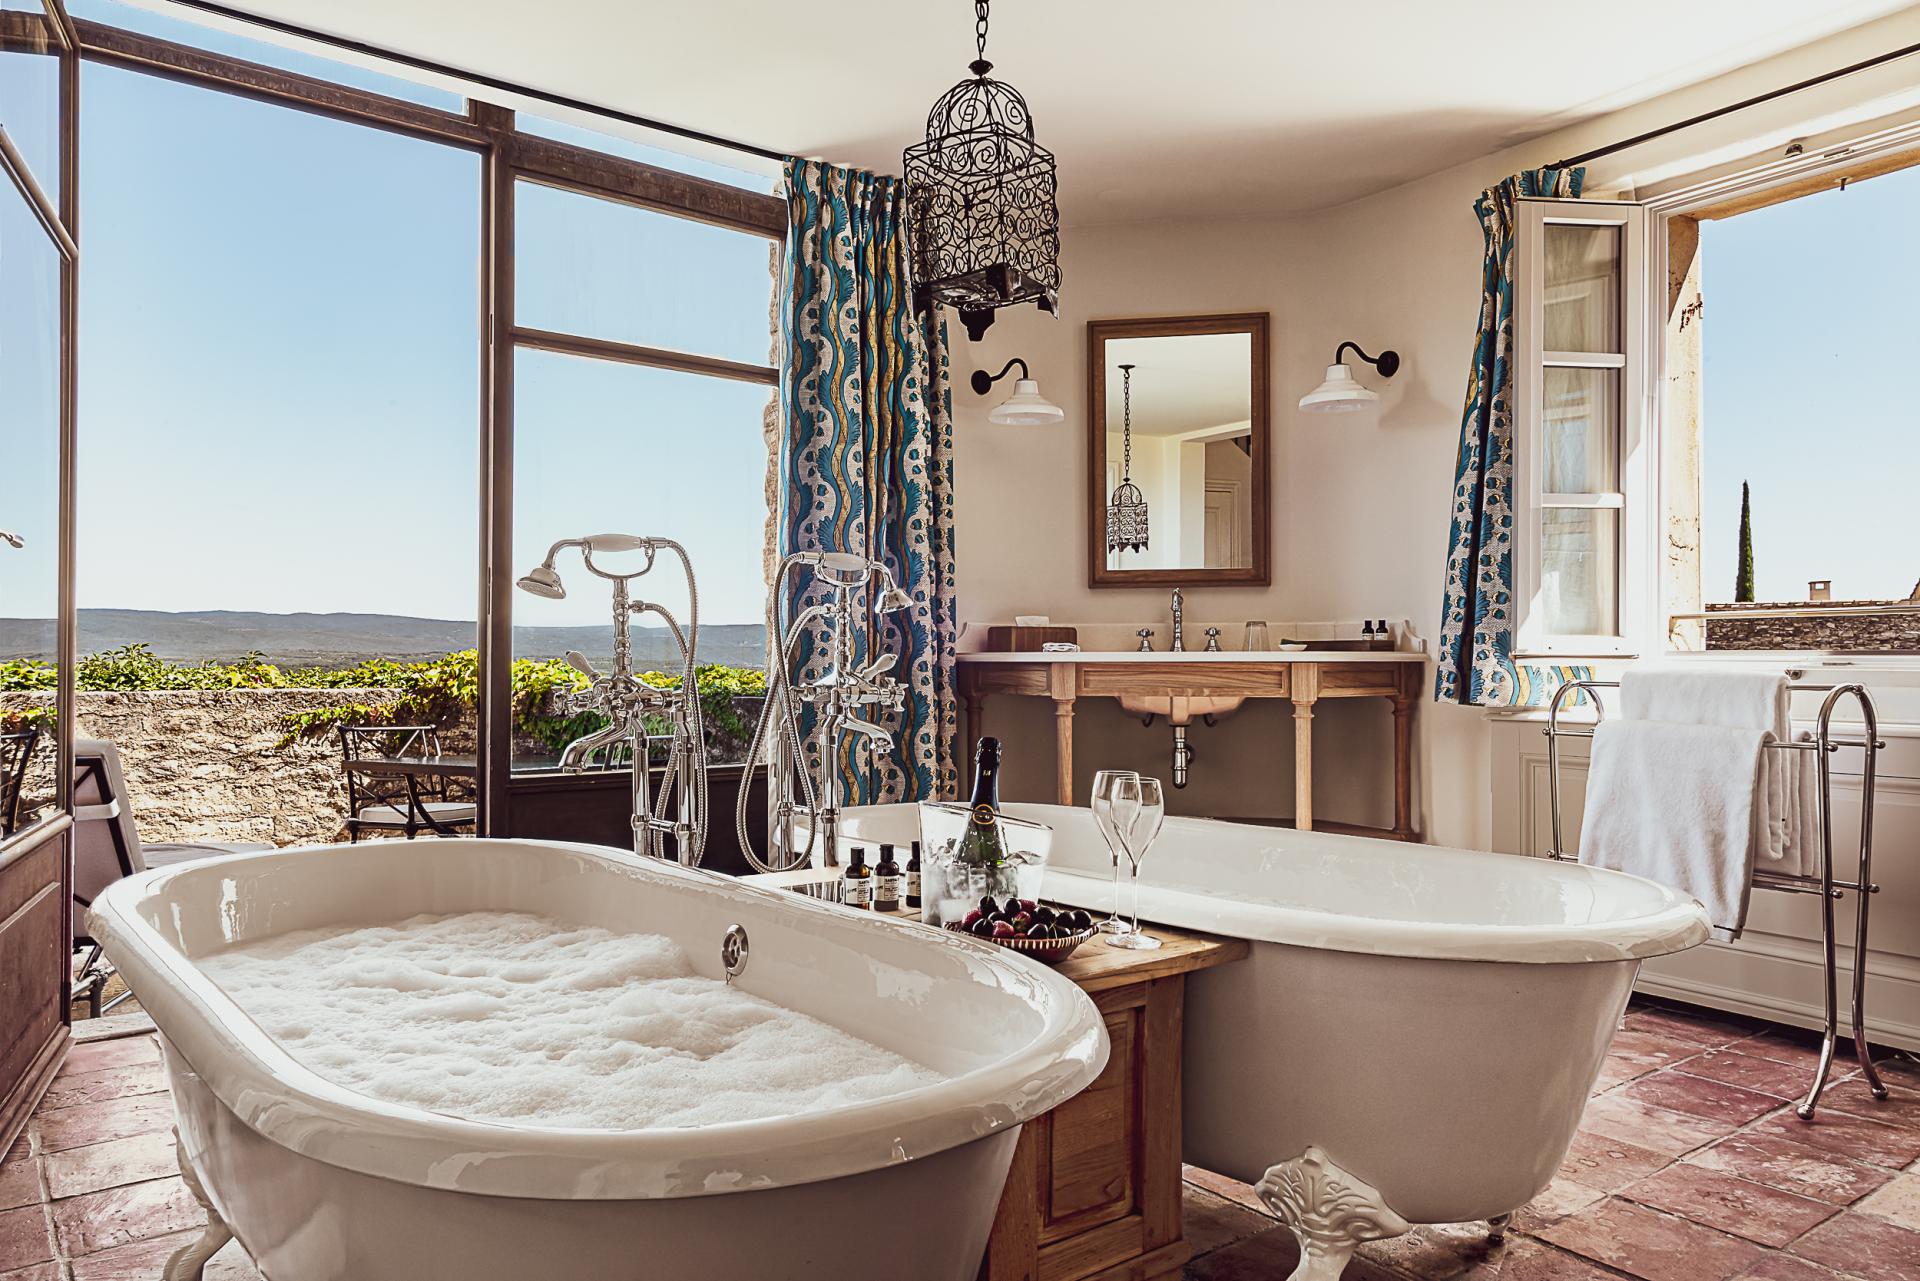 Crillon le Brave, Α hideaway in the heart of Provence